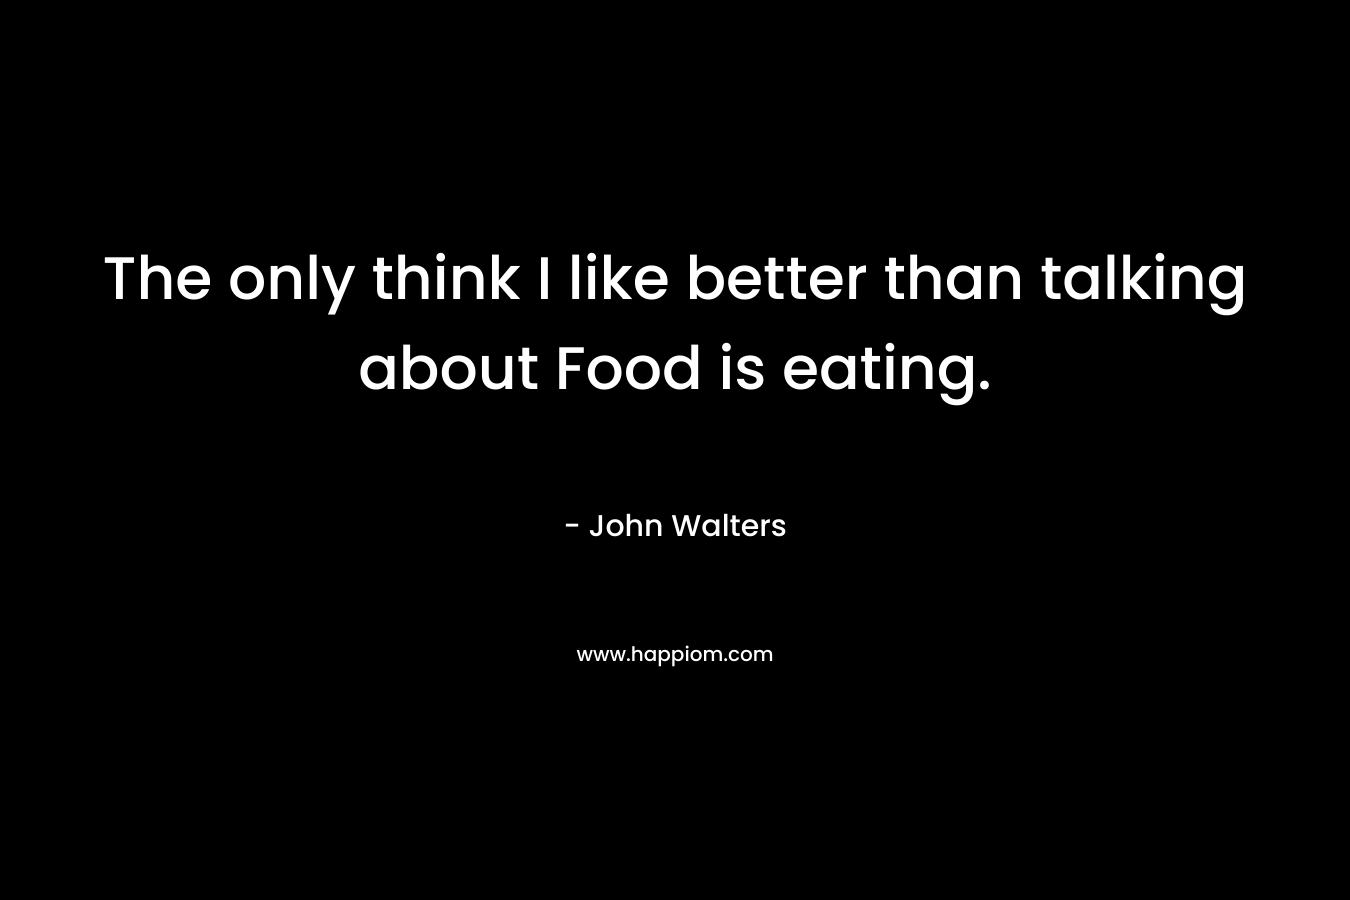 The only think I like better than talking about Food is eating. – John Walters